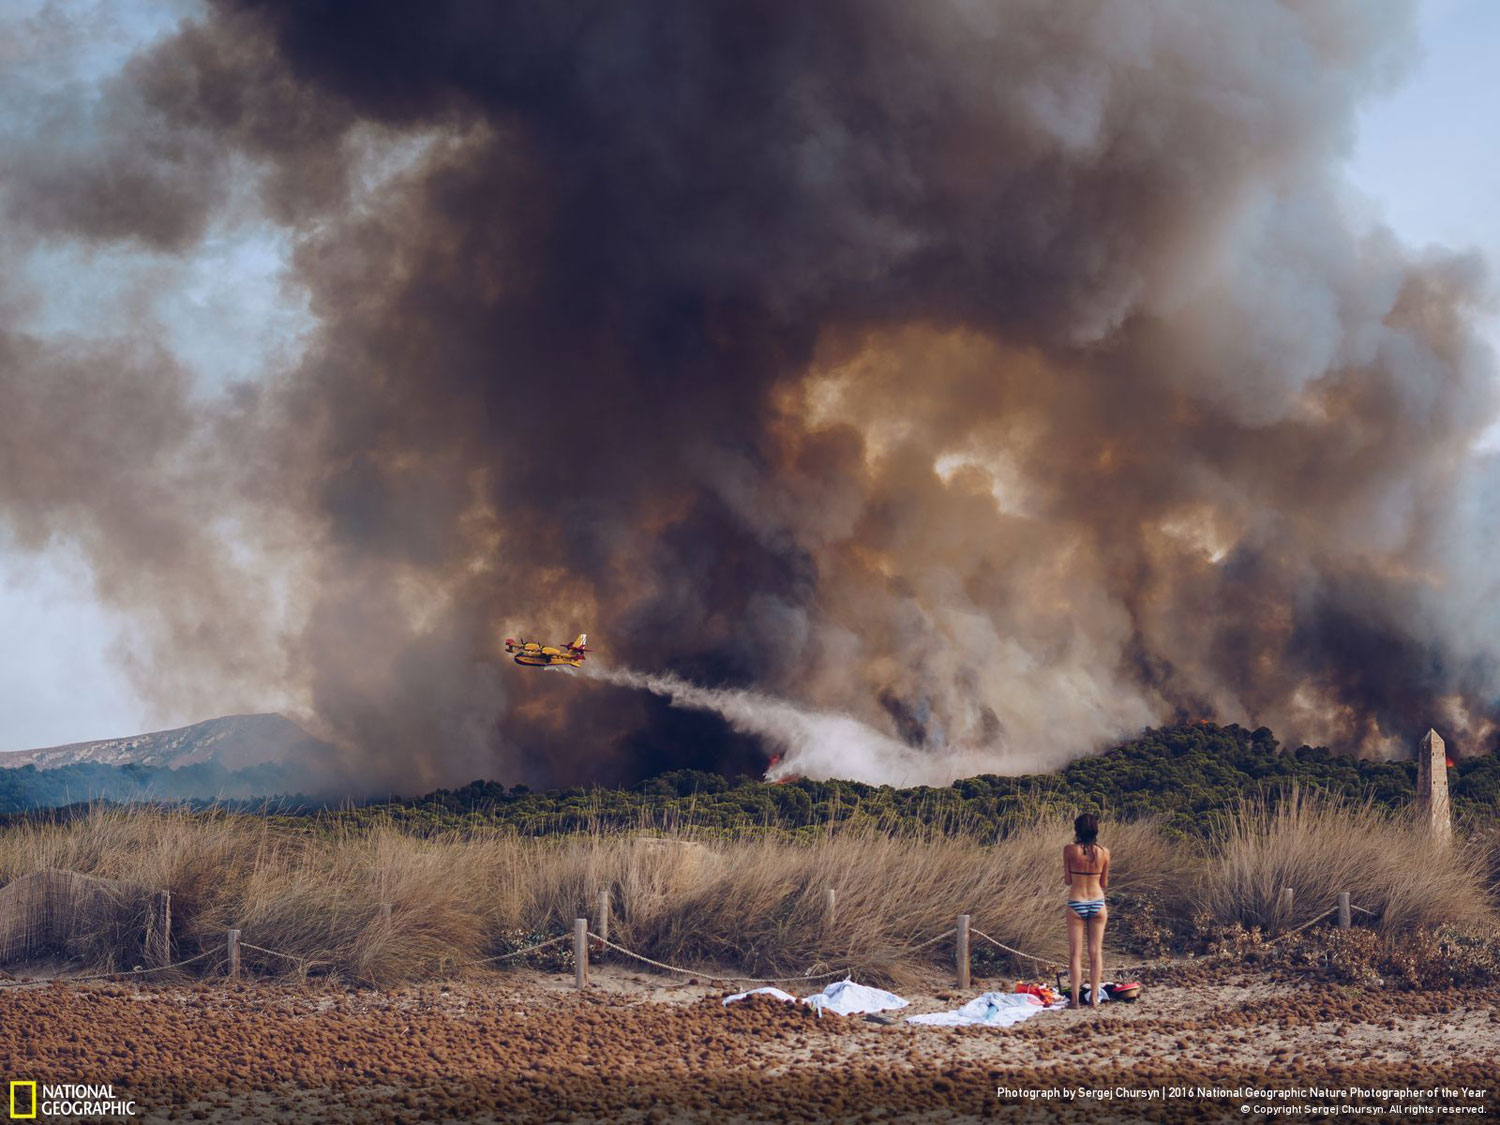 Wildfire at the beach // Photo and caption by Sergej Chursyn